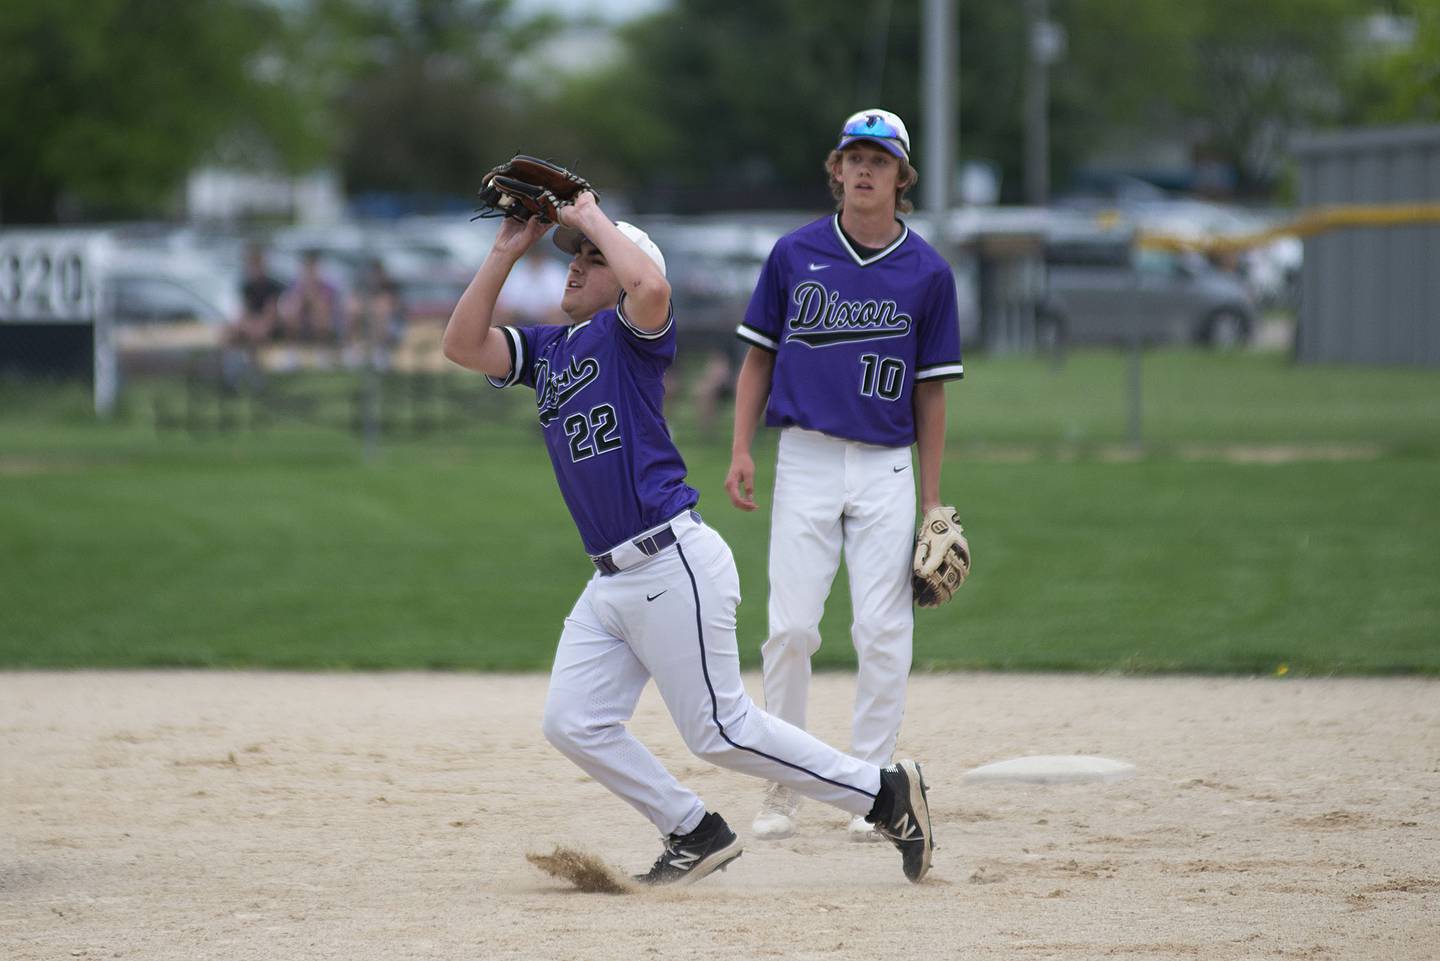 Dixon’s Trey Scheidegger hauls in a pop-up Tuesday, May 17, 2022 against Sterling.